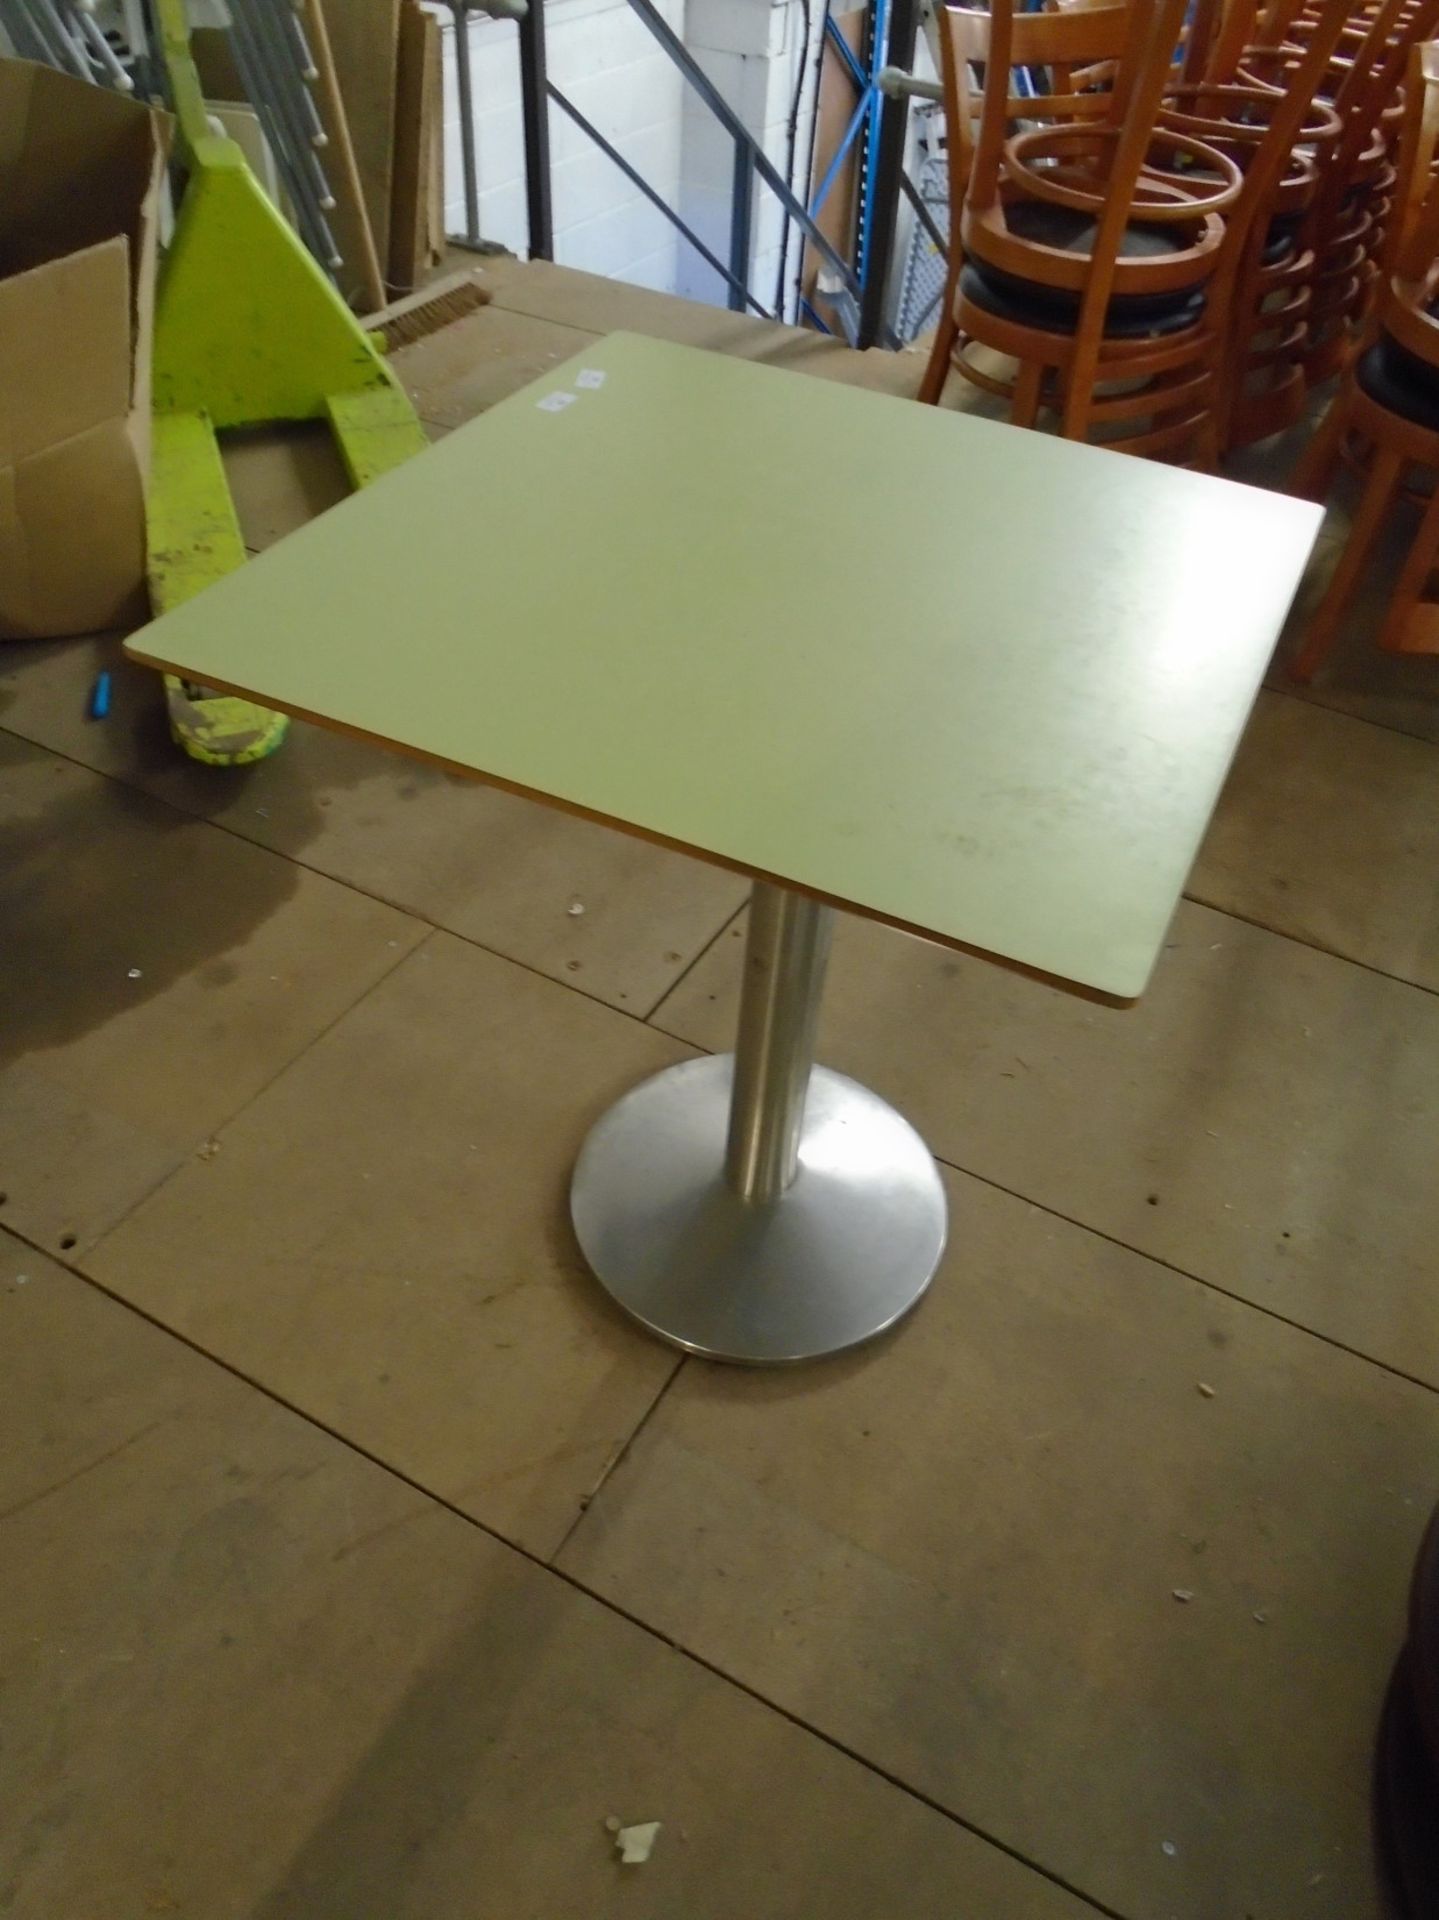 * 4 x S/S pedestal base table with 650 x 650 square tops - lime